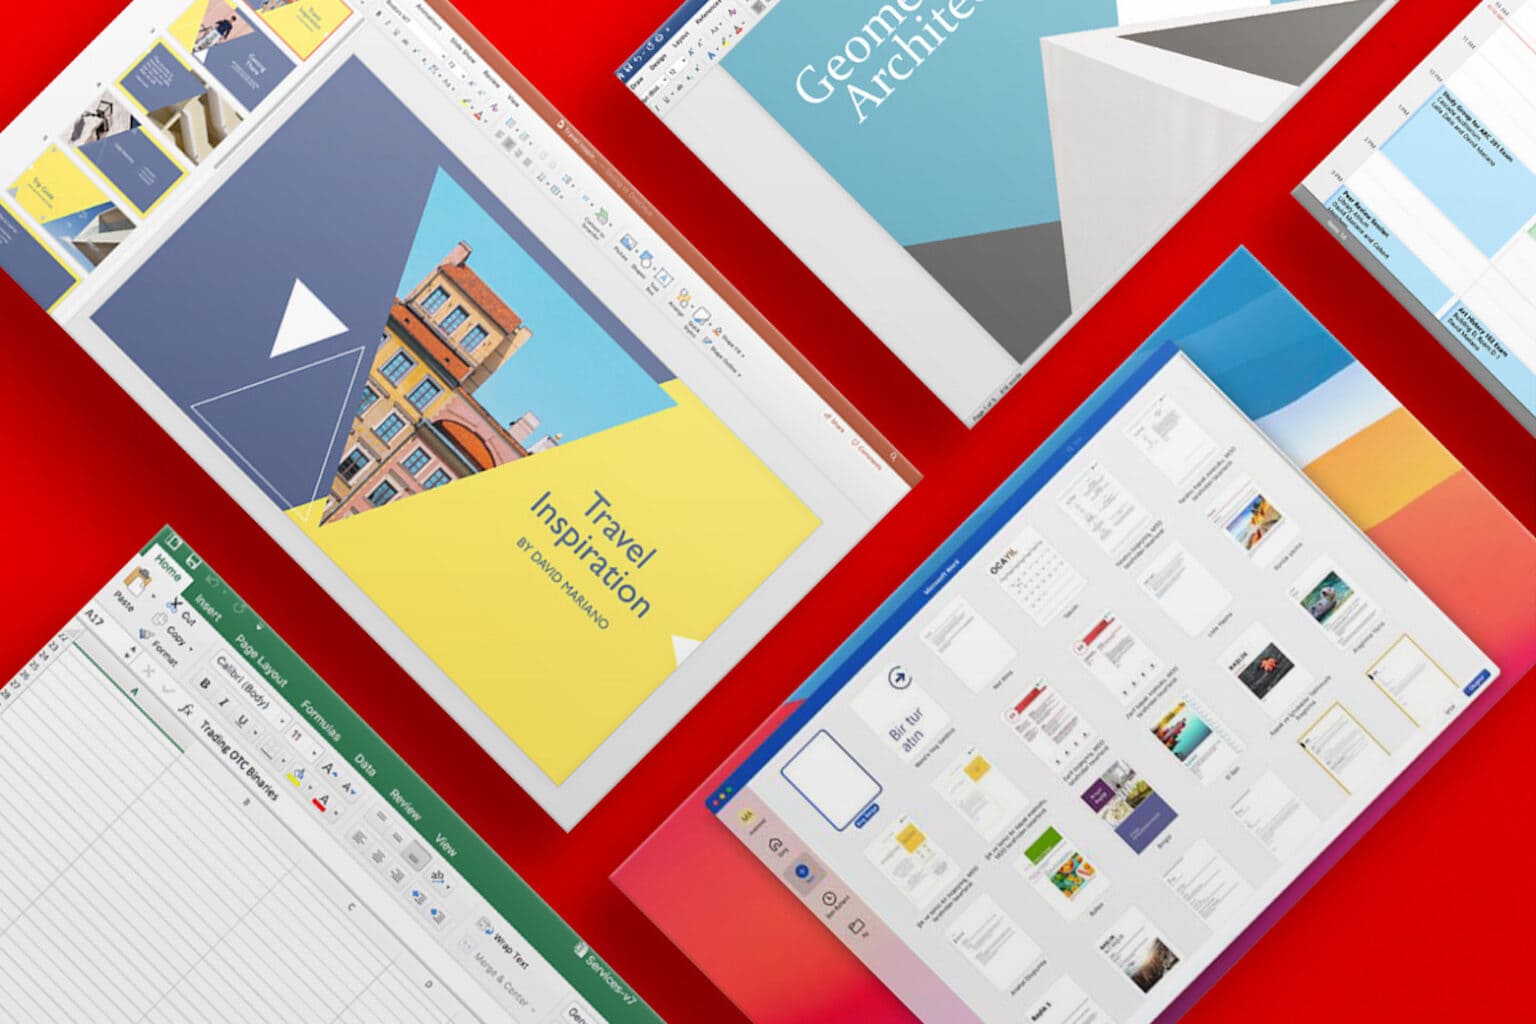 Your very own Microsoft Office license for Mac or PC forever — just $39.99.